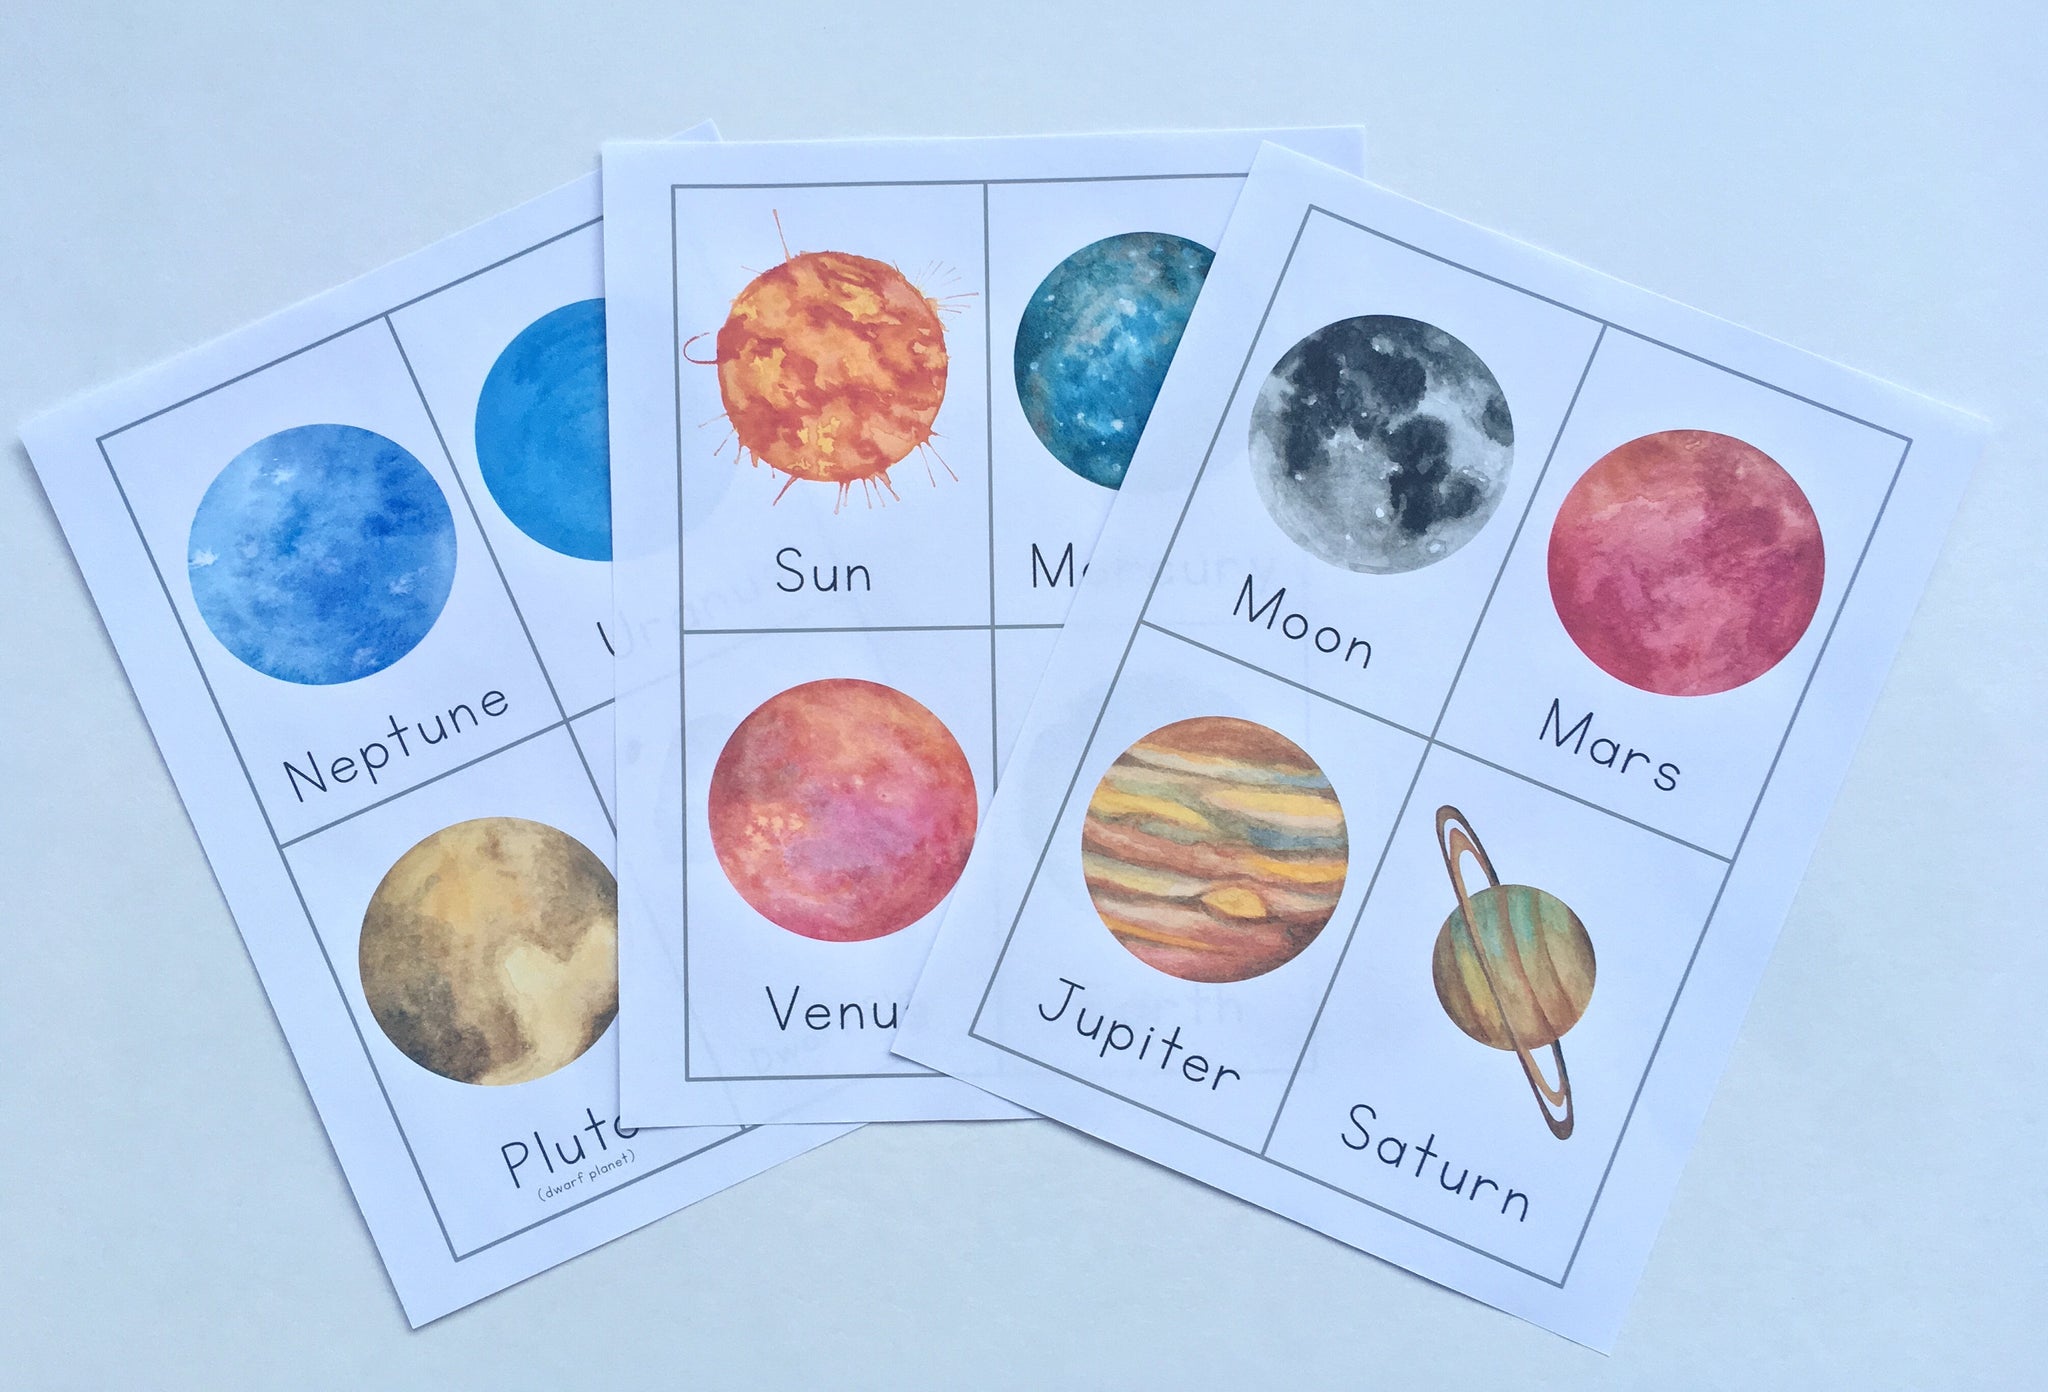 Free Printable Solar System Flashcards - Look! We're Learning!